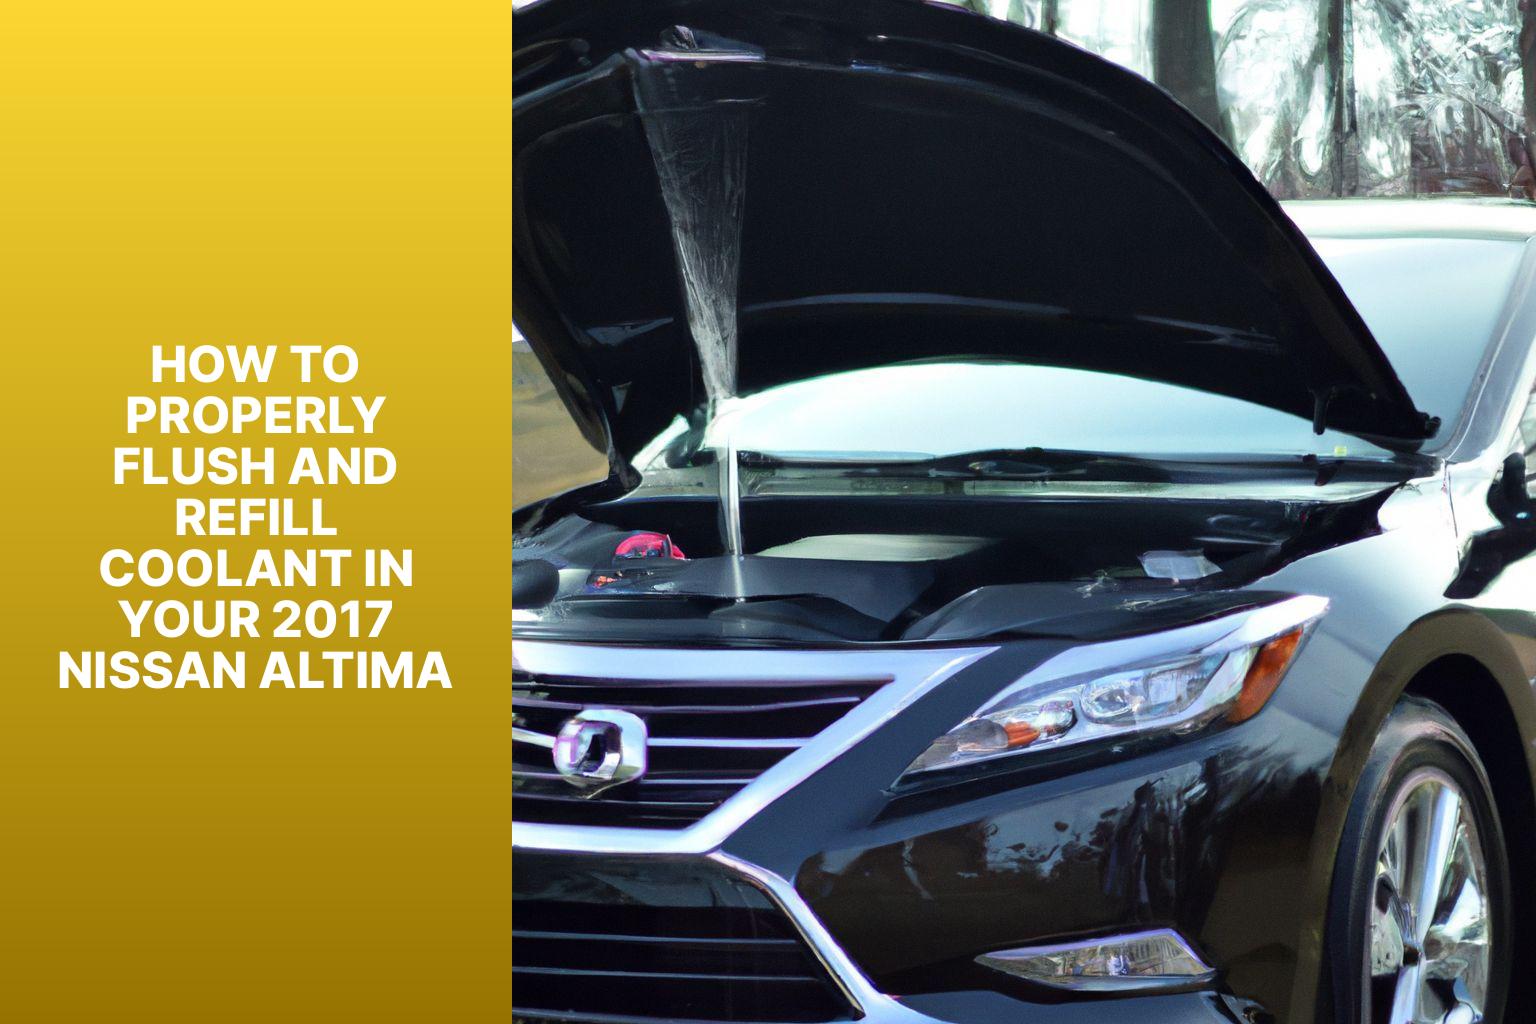 How to Properly Flush and Refill Coolant in Your 2017 Nissan Altima - Choosing the Right Coolant: 2017 Nissan Altima Coolant Type Guide 